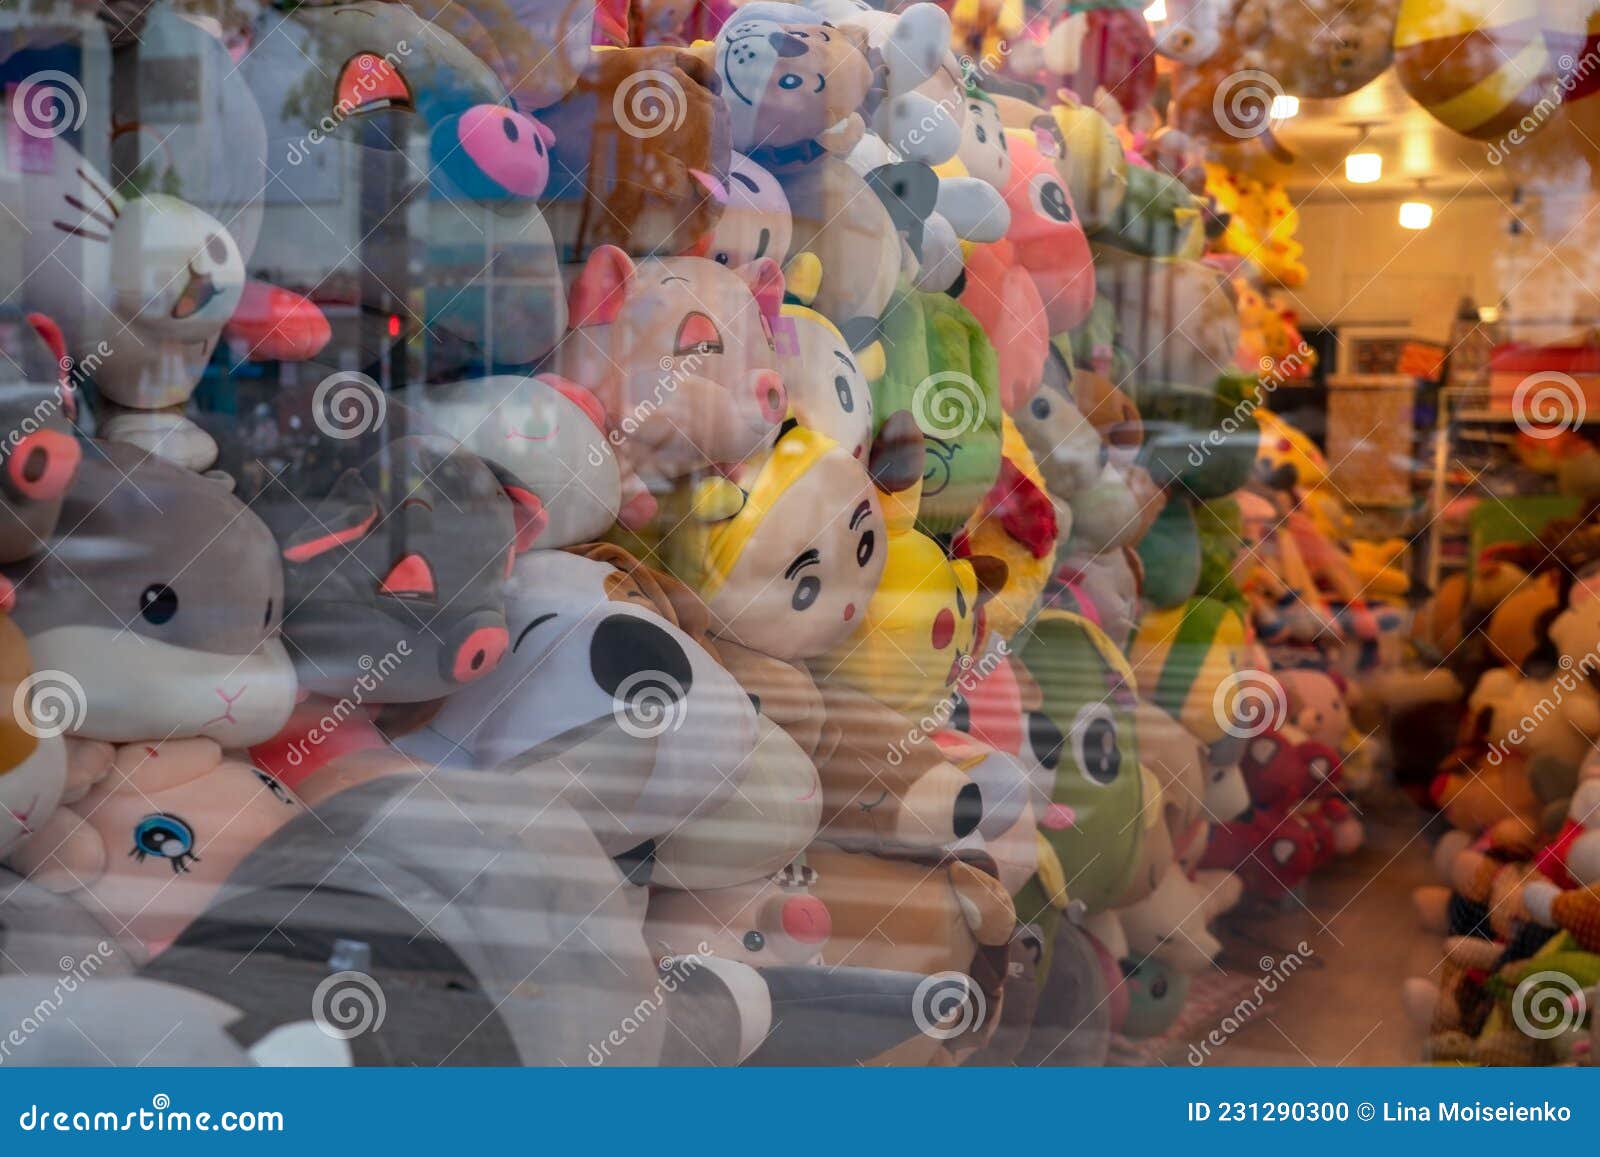 Soft toy shop display stock photo. Image of interior - 231290300